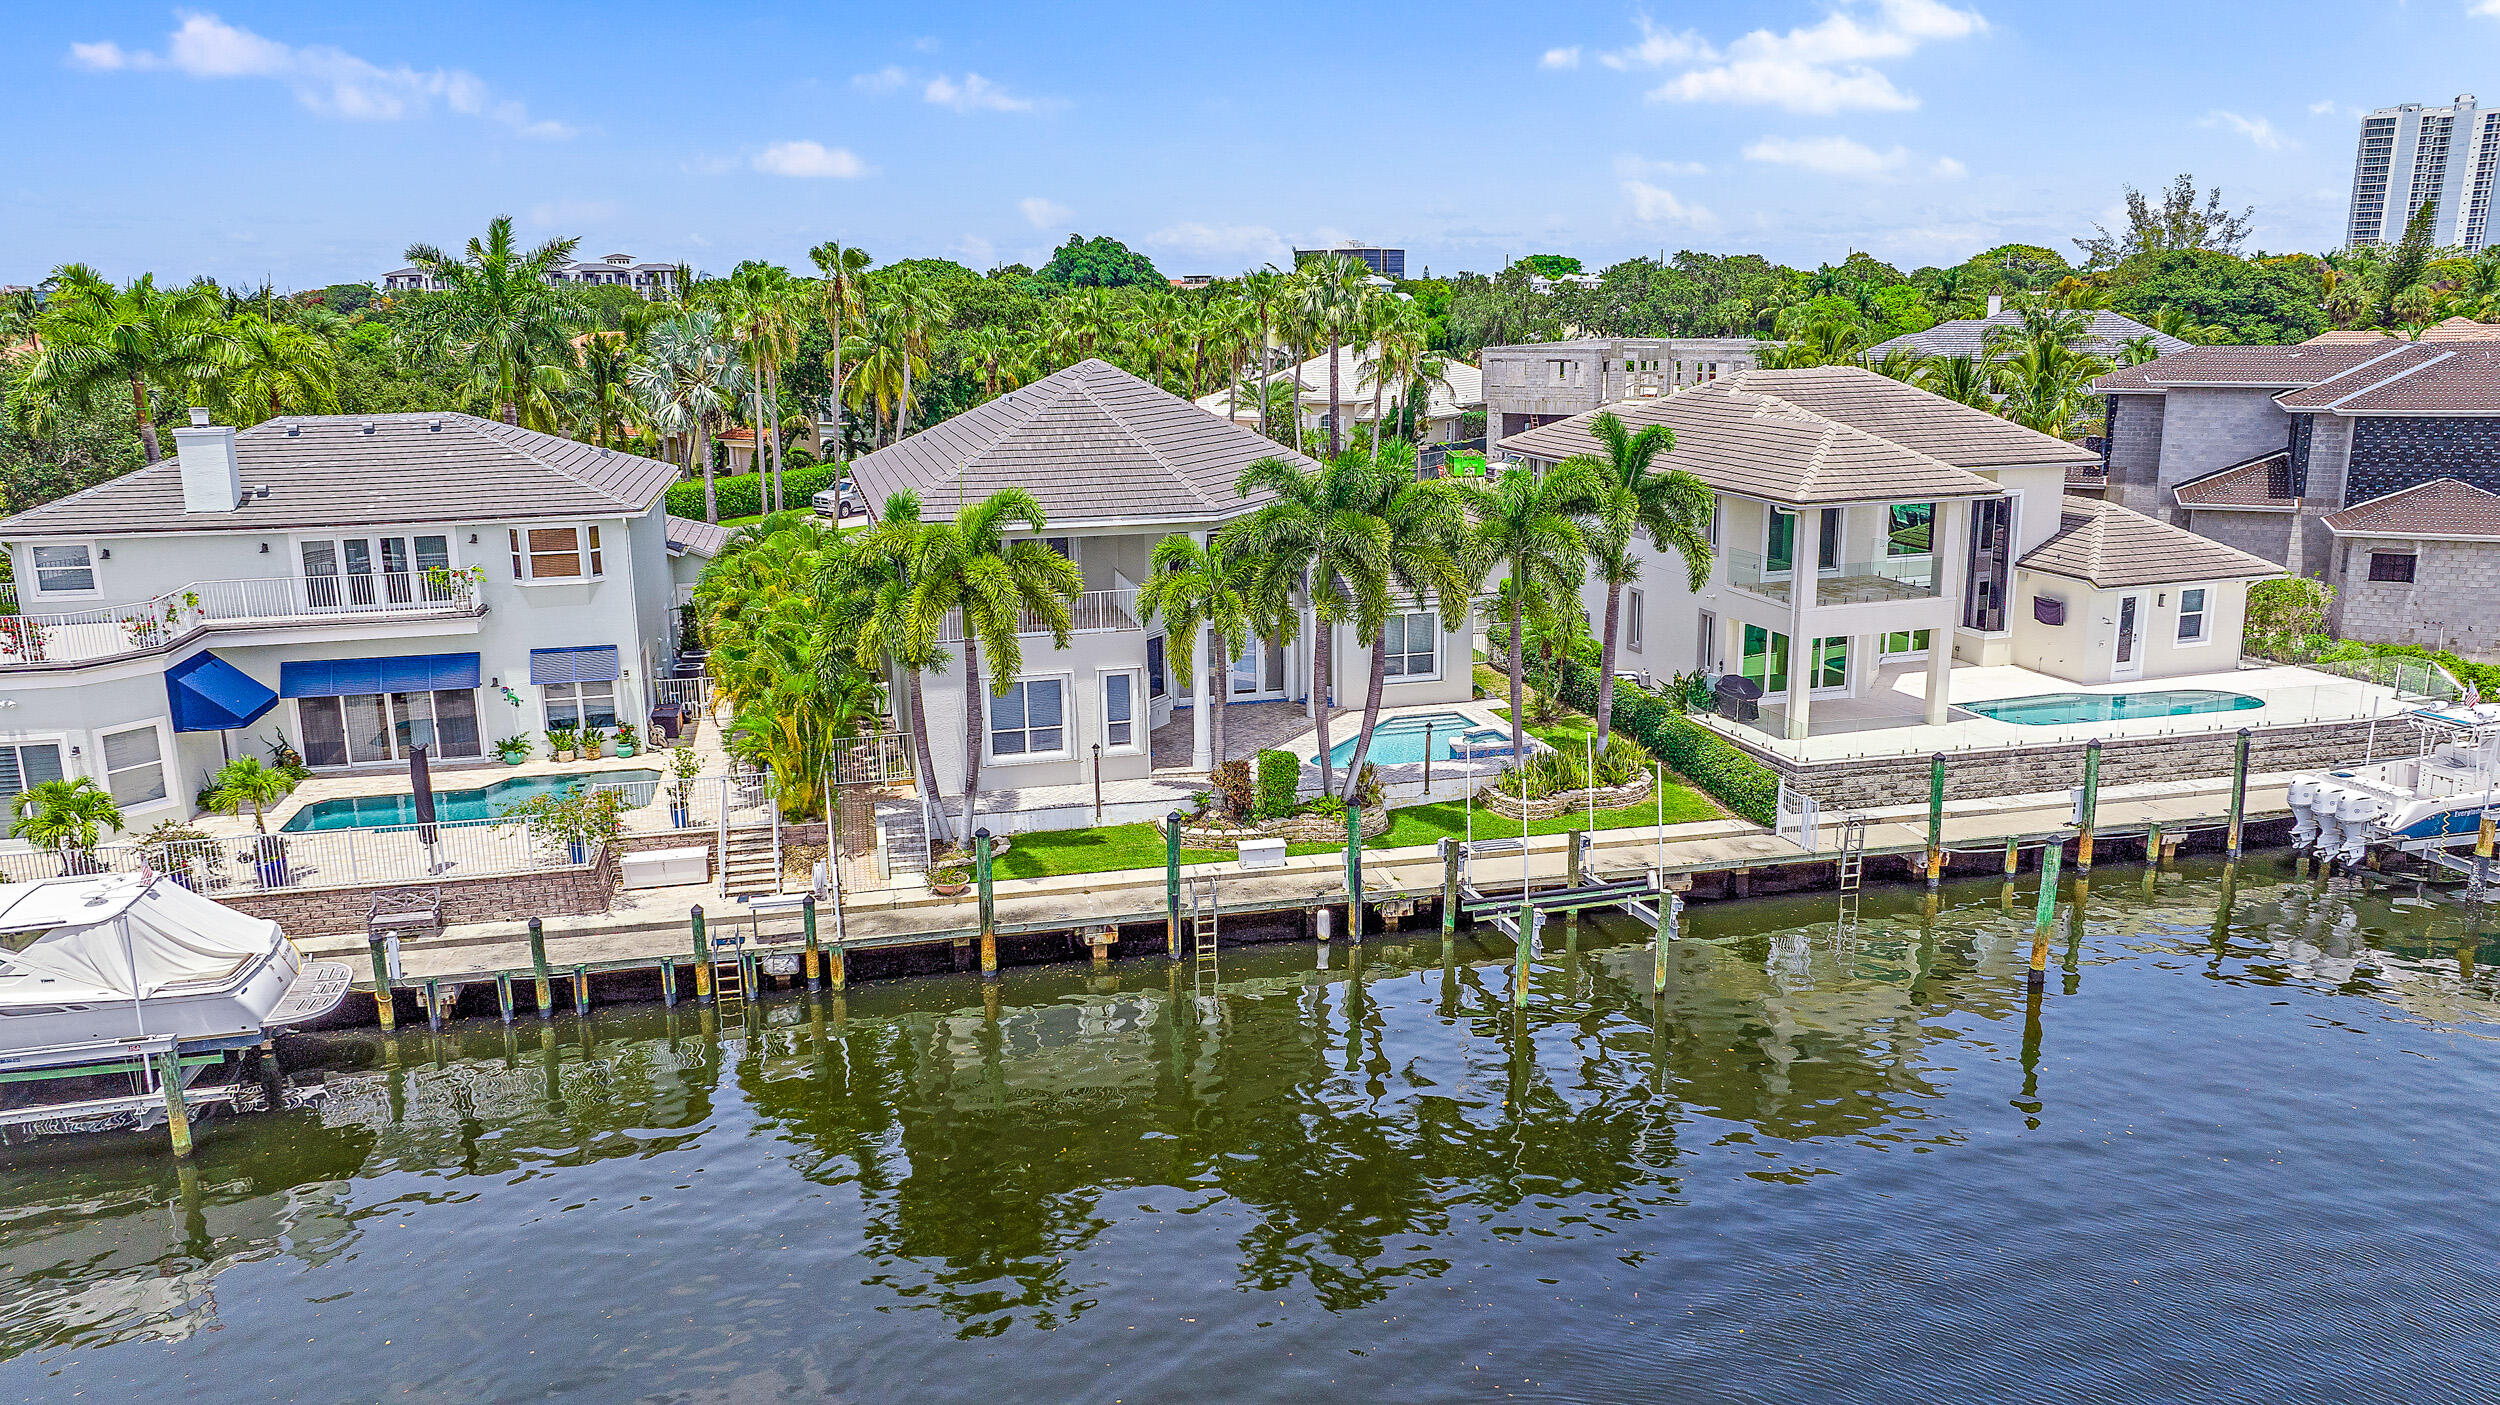 Located in the much sought after gated community of Harbour Point Marina this home offers wide Lagoon views, 75' of deep water frontage, a 2020' 20,000lb lift and a new roof in 2018'. The open and spacious floor plan has separate living and family rooms, custom kitchen with newer granite countertops, a formal dining room, marble and wood floors, first floor master bedroom, a den/office and a heated pool/spa.